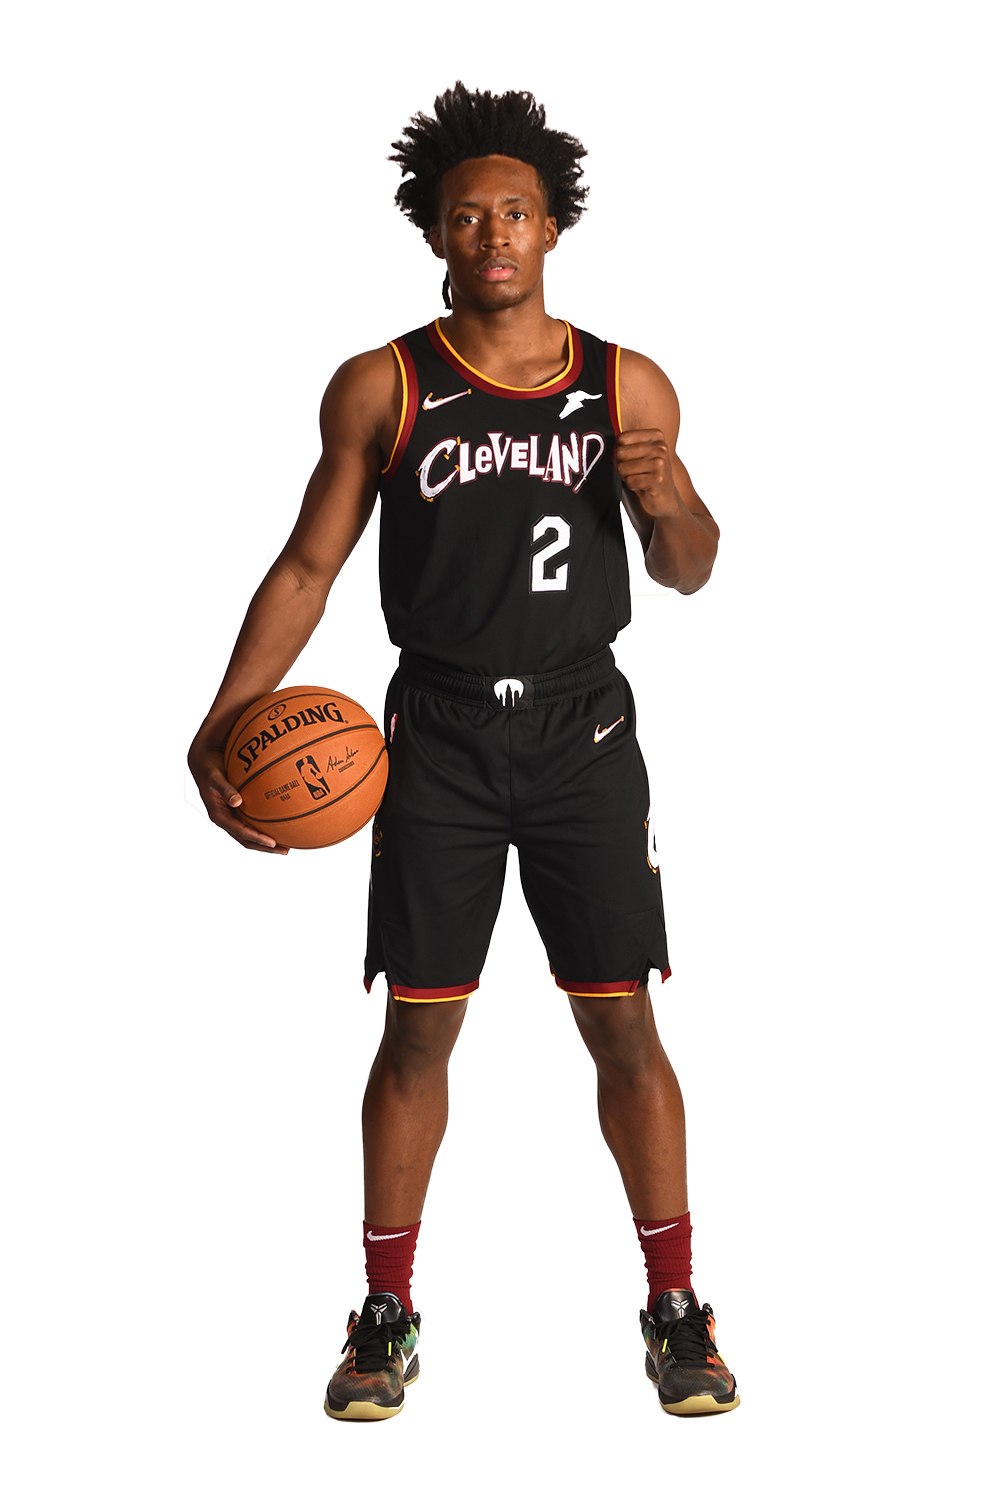 Cleveland Cavaliers on X: Respect the 𝐏𝐀𝐒𝐓. Represent the  𝐅𝐔𝐓𝐔𝐑𝐄. Introducing our 2019-20 City Edition uniform, inspired by  various threads ove